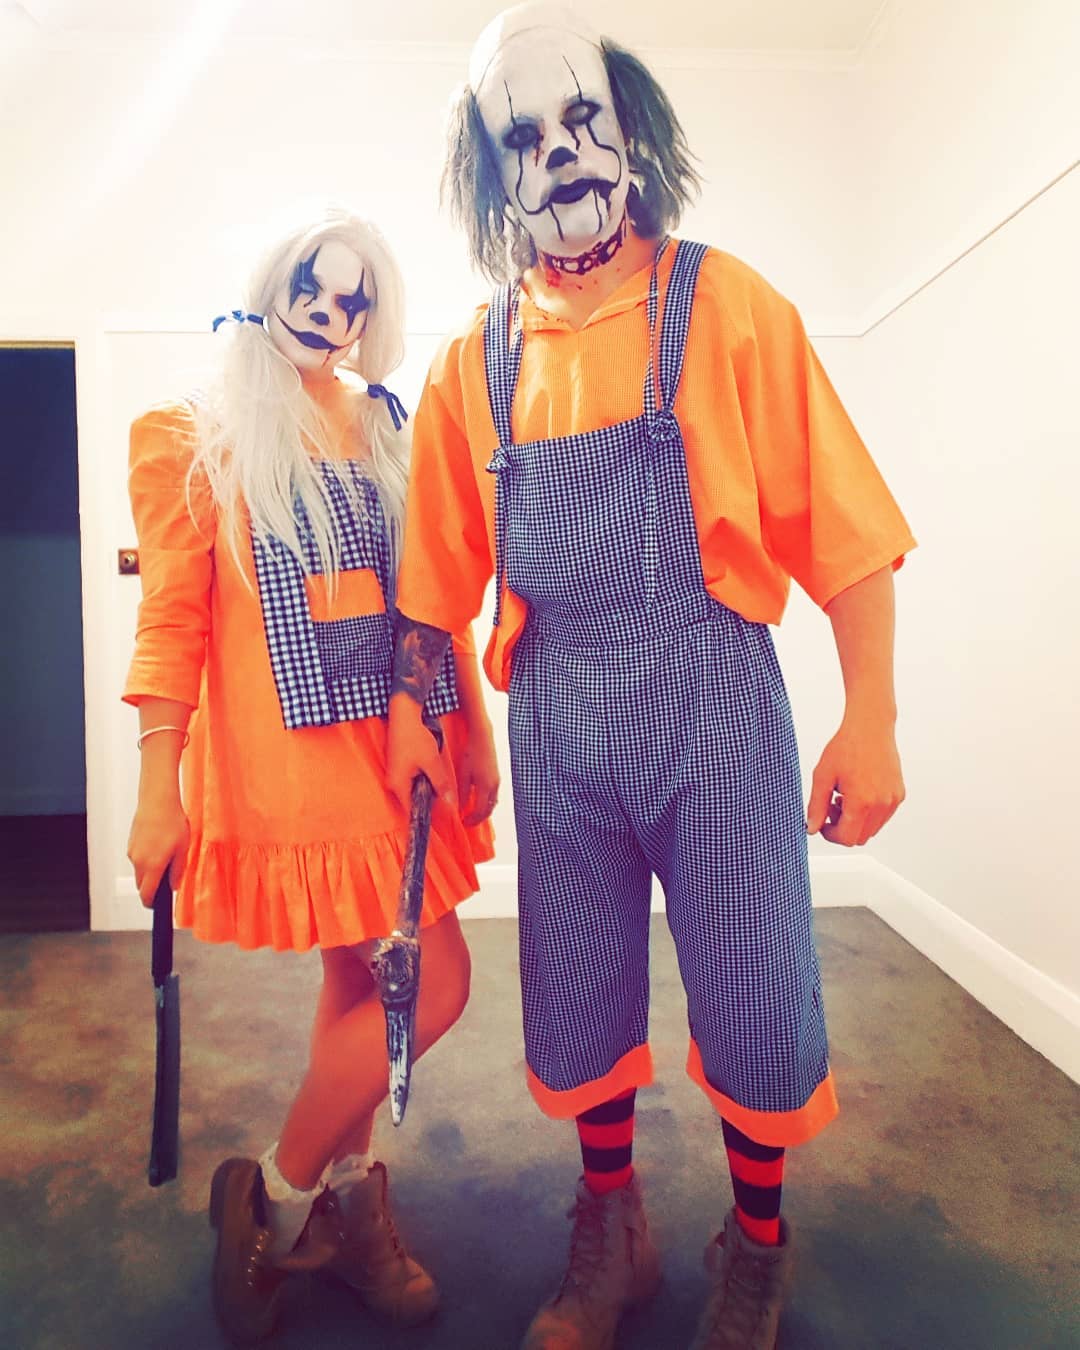 Evil clown couple ready for Halloween party. Pic by celestegoullet